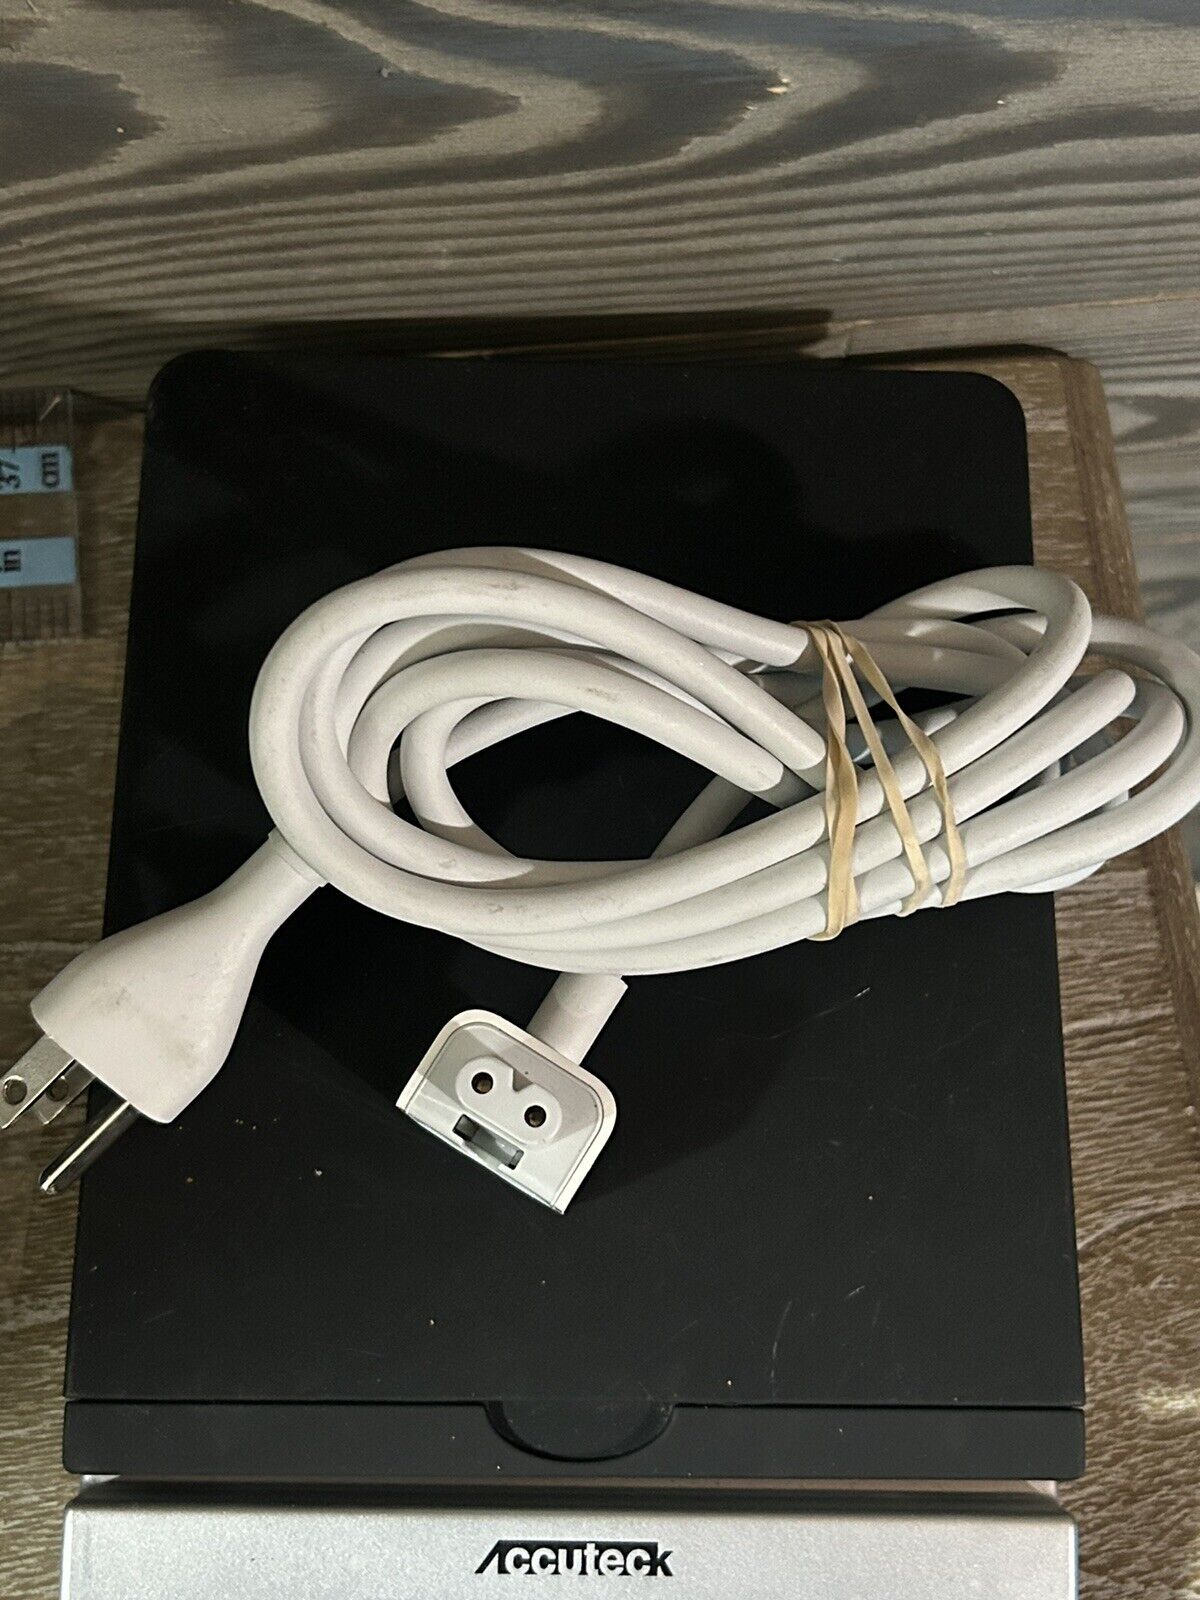 NEW Apple Macbook Genuine 6 FT E344534 Longwell AC Power Cord Cable 2.5A 125v 